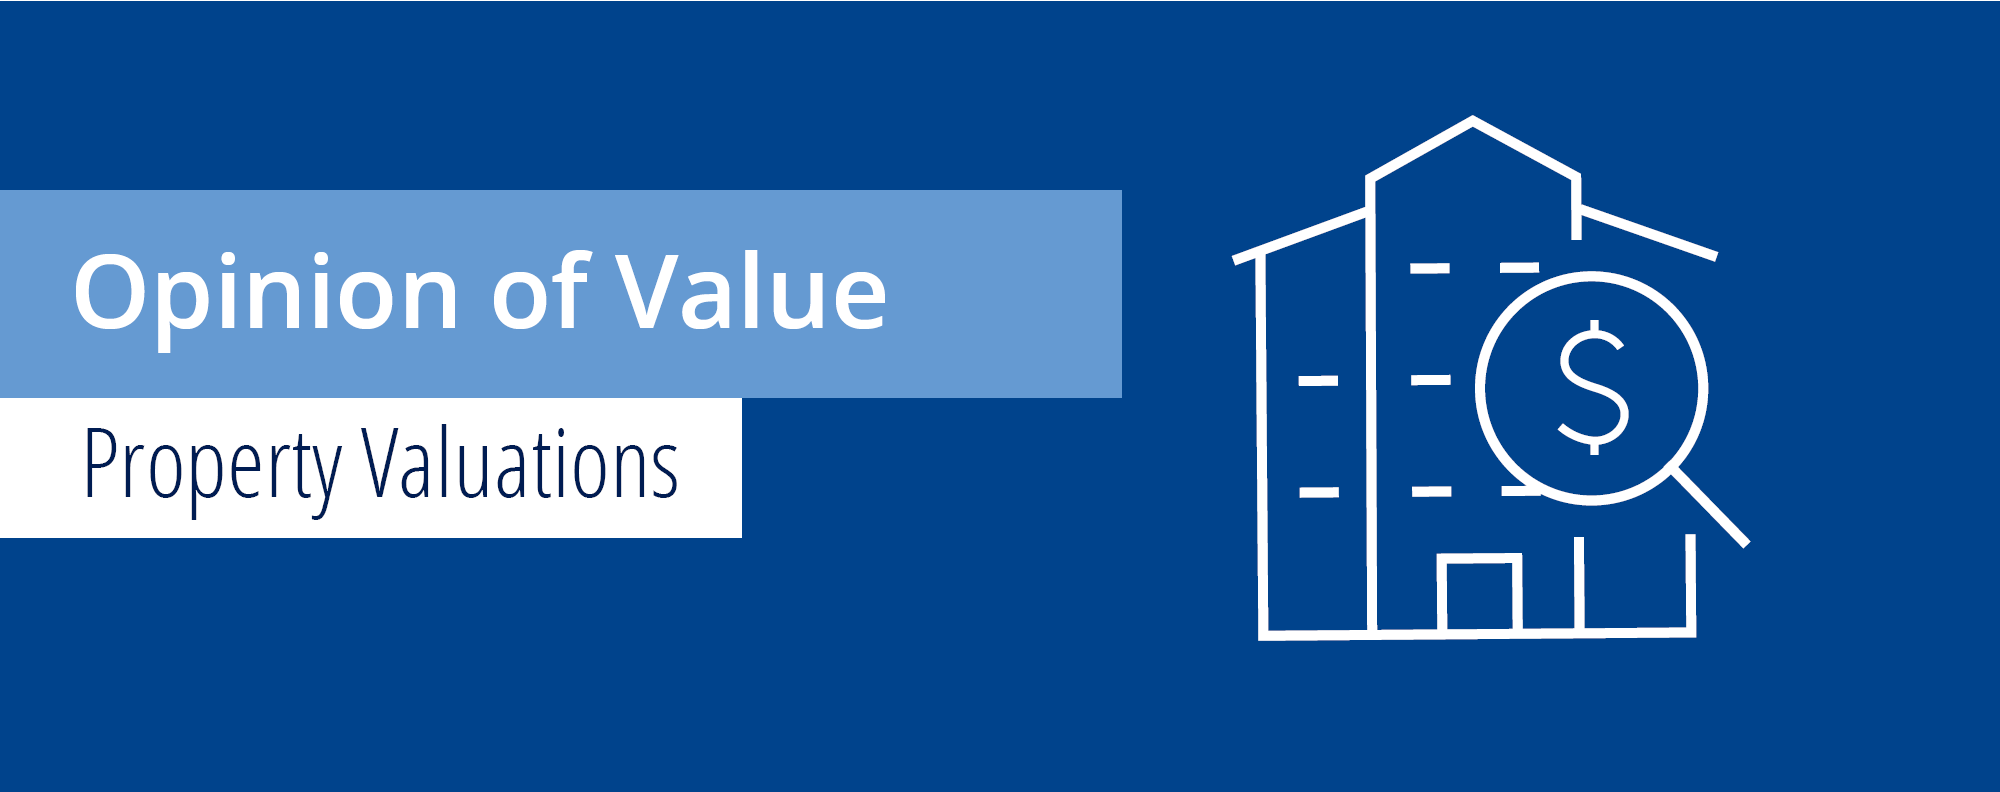 Opinion of Value | Property Valuations